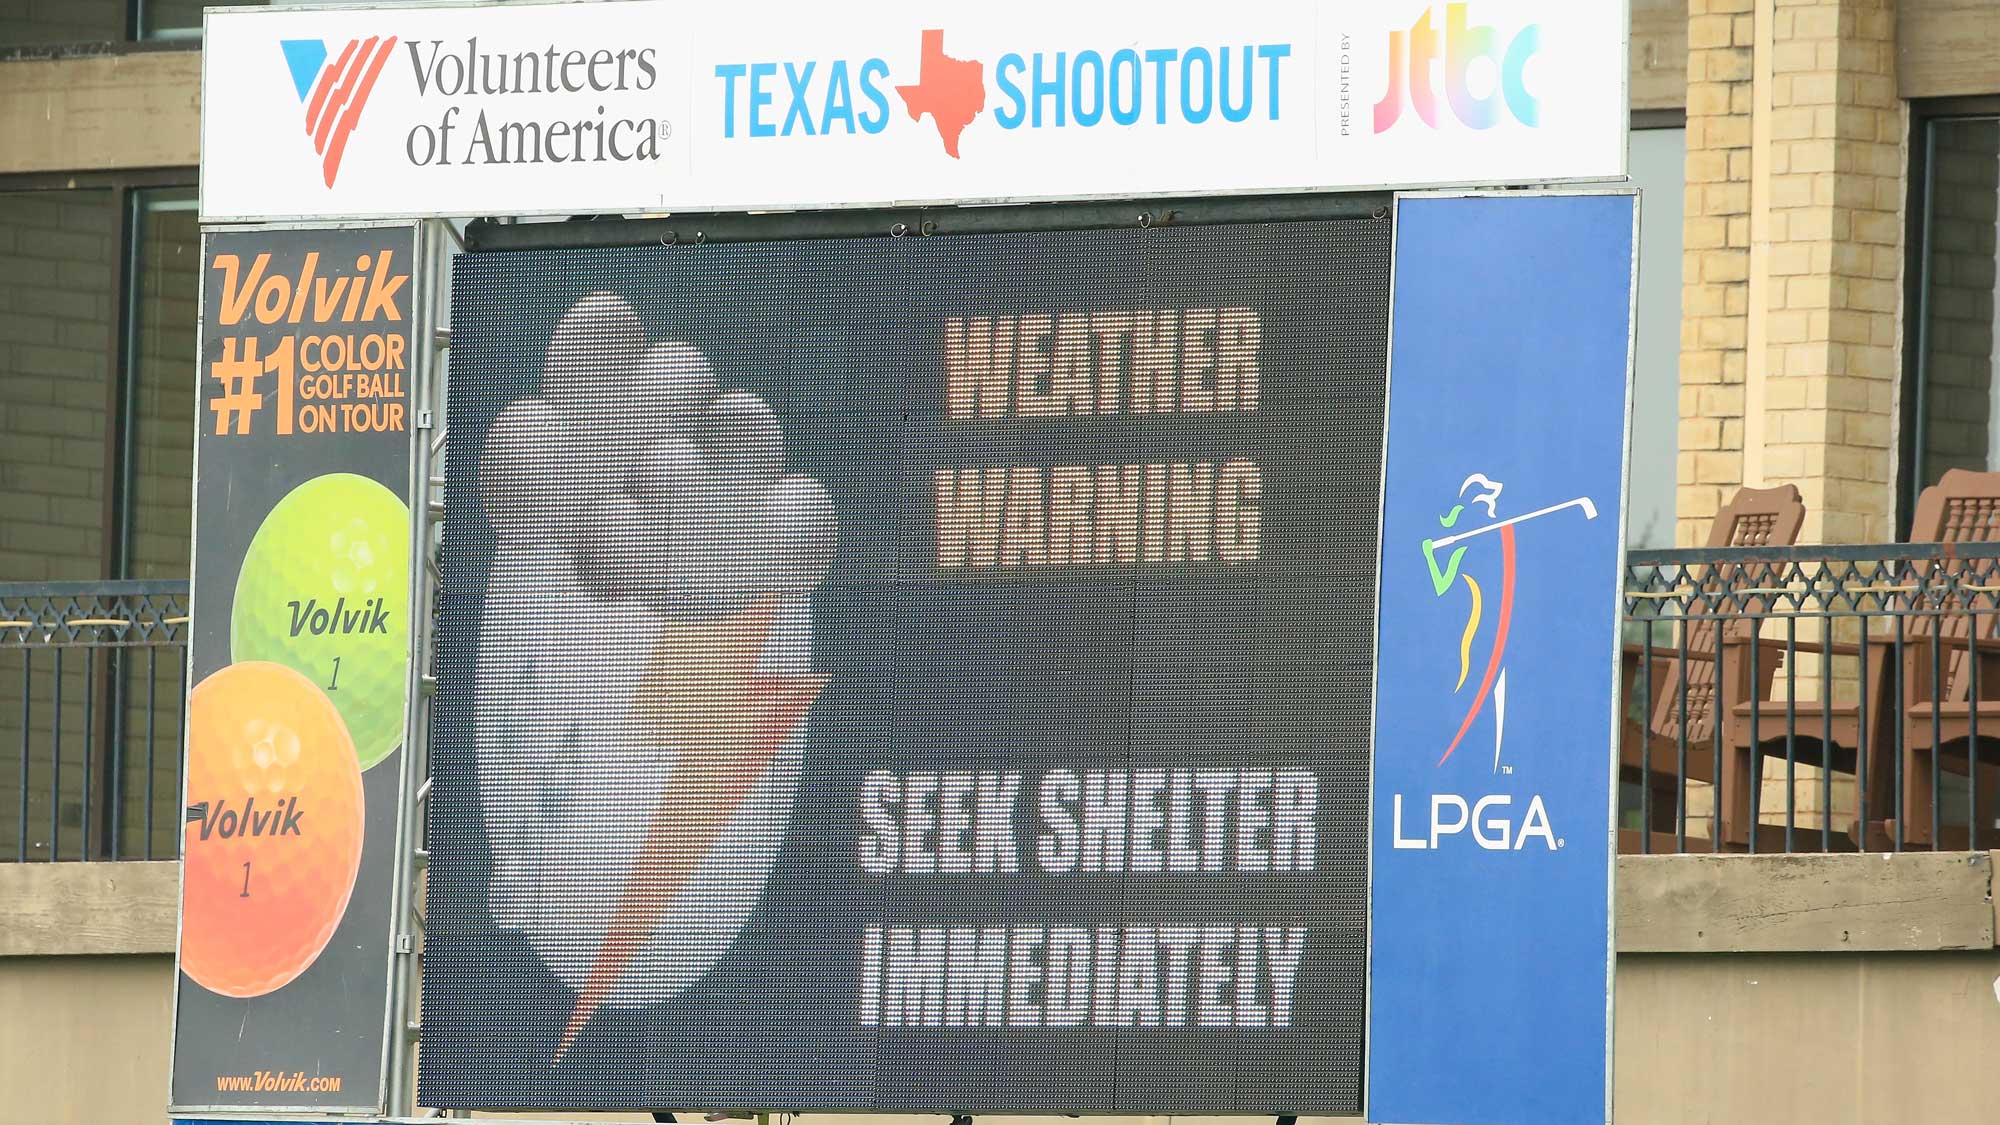 A warning sign is seen after play was suspended by dangerous weather during the second round of the Volunteers of America Texas Shootout